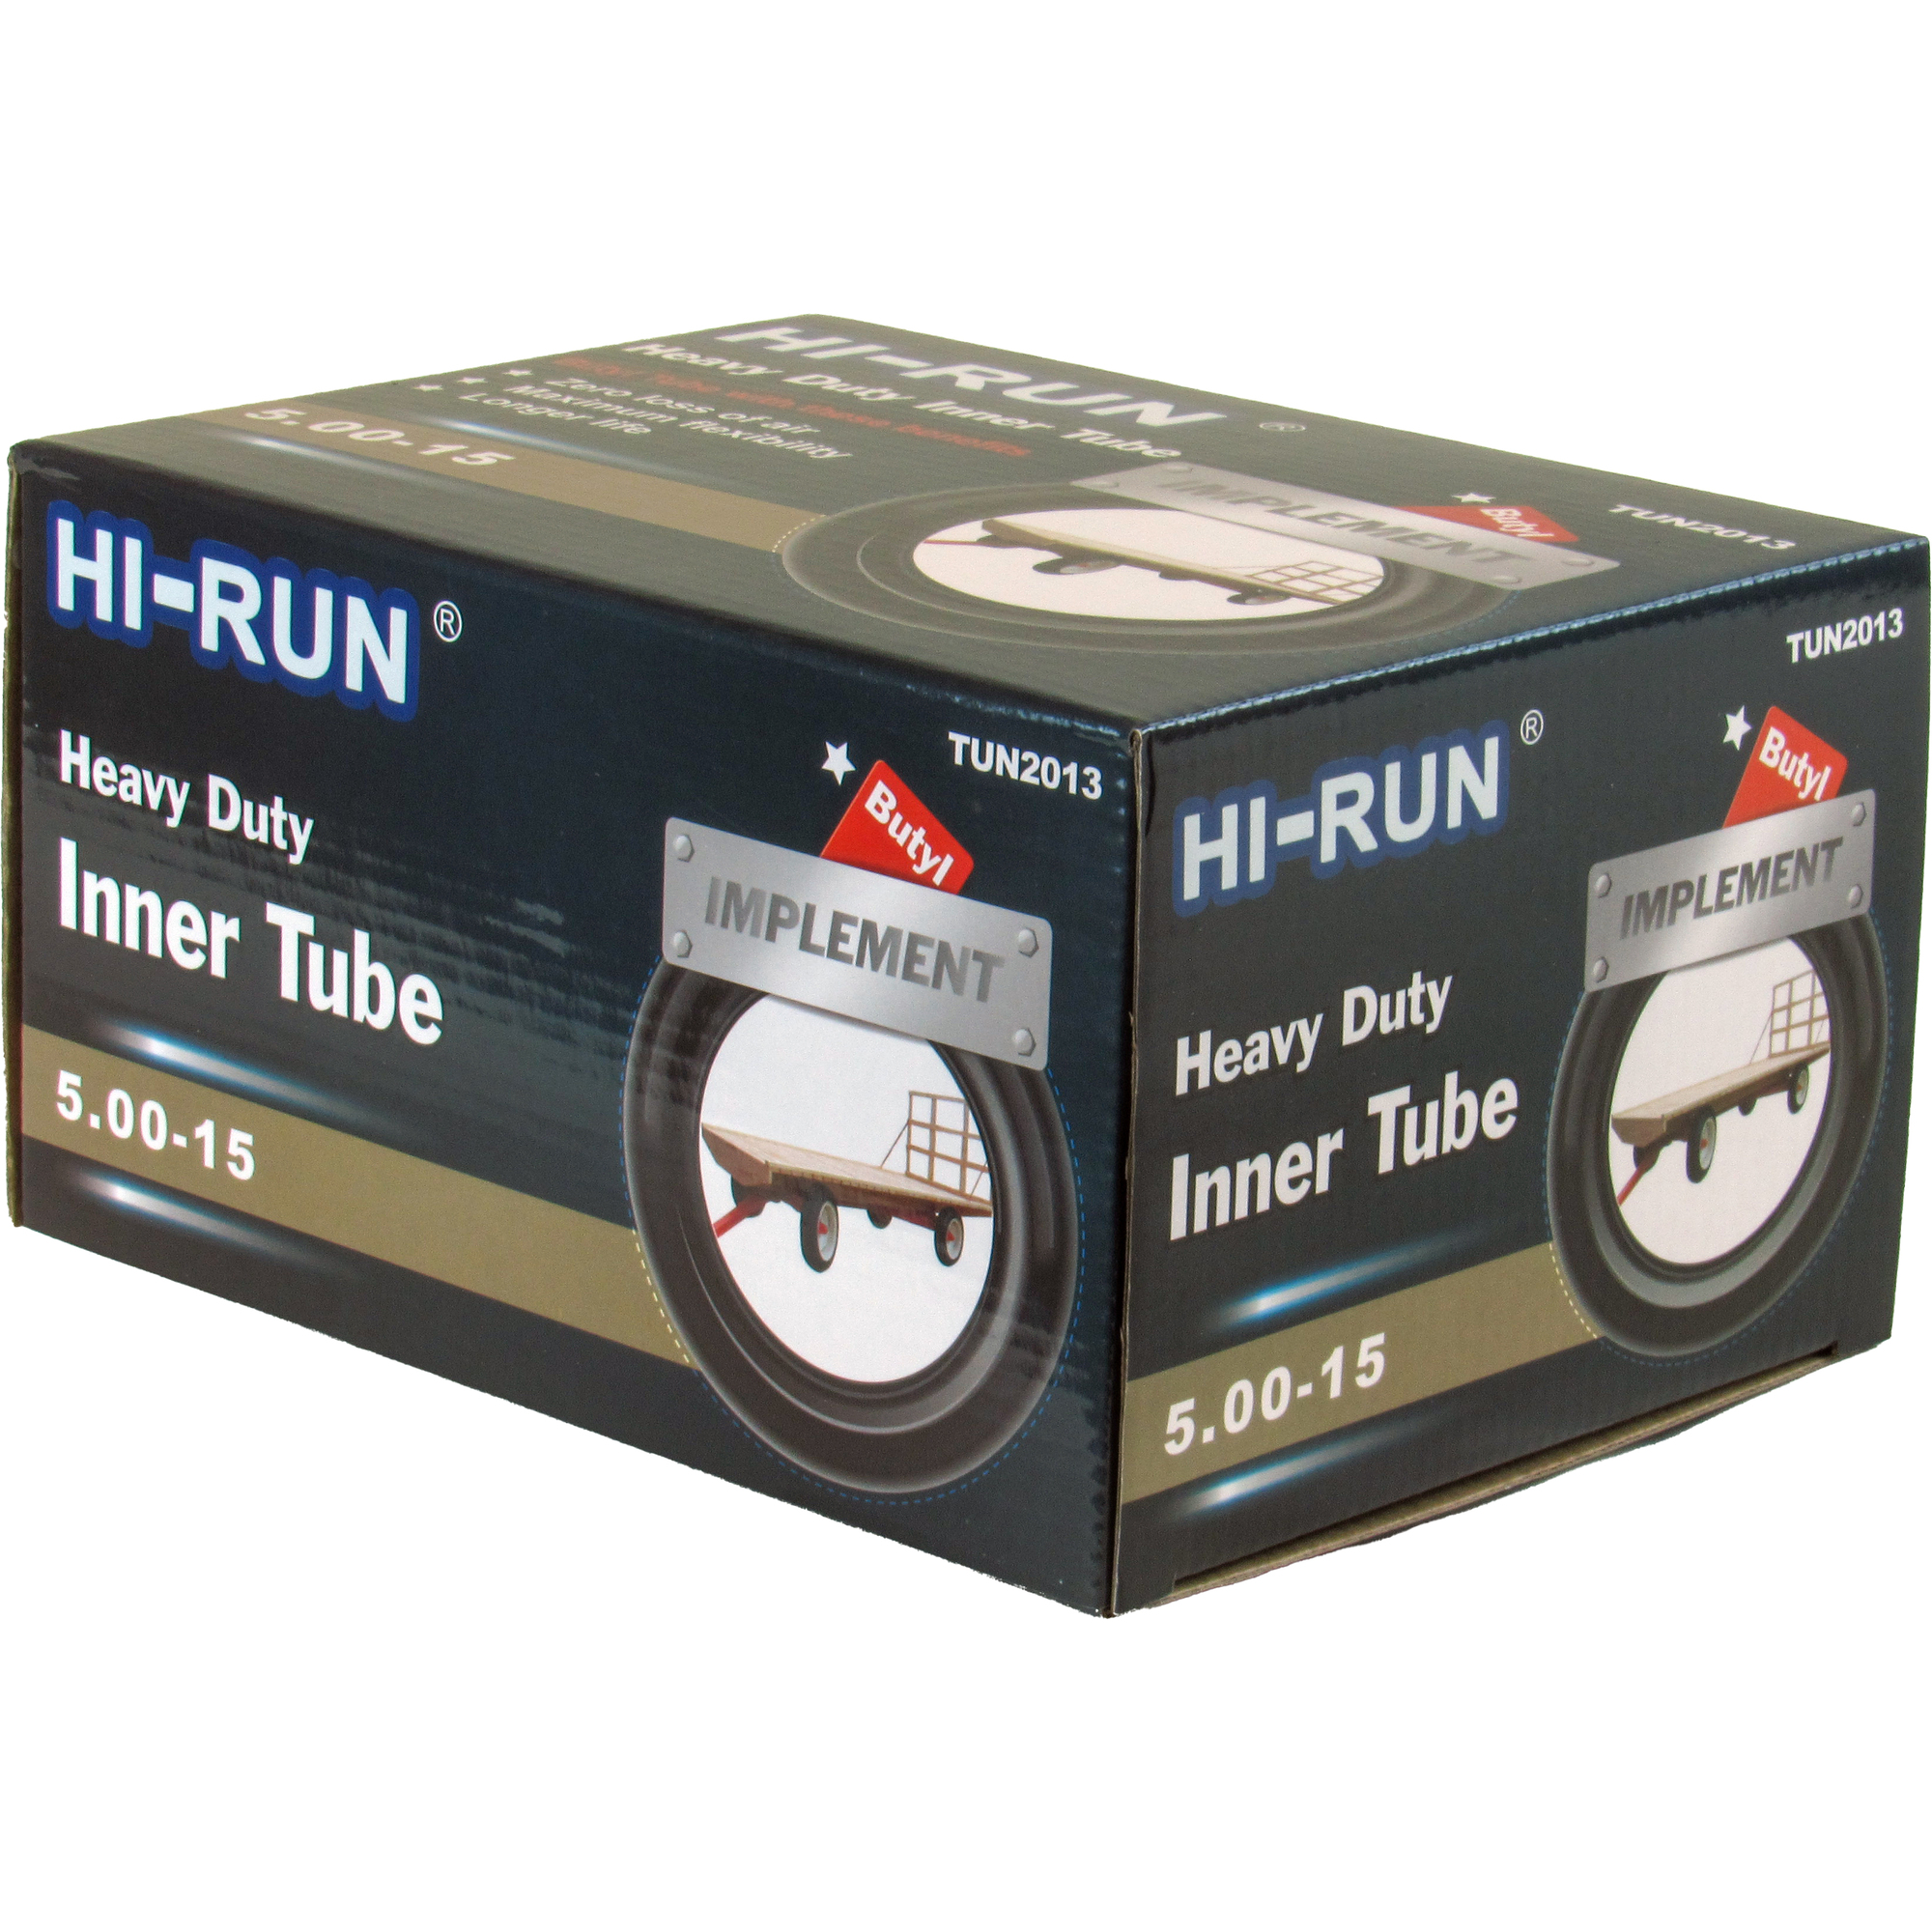 HI-RUN, Tube 5.00-15 (TR15) Float Implement, Fits Rim Size 15 in, Included (qty.) 1 Model TUN2013